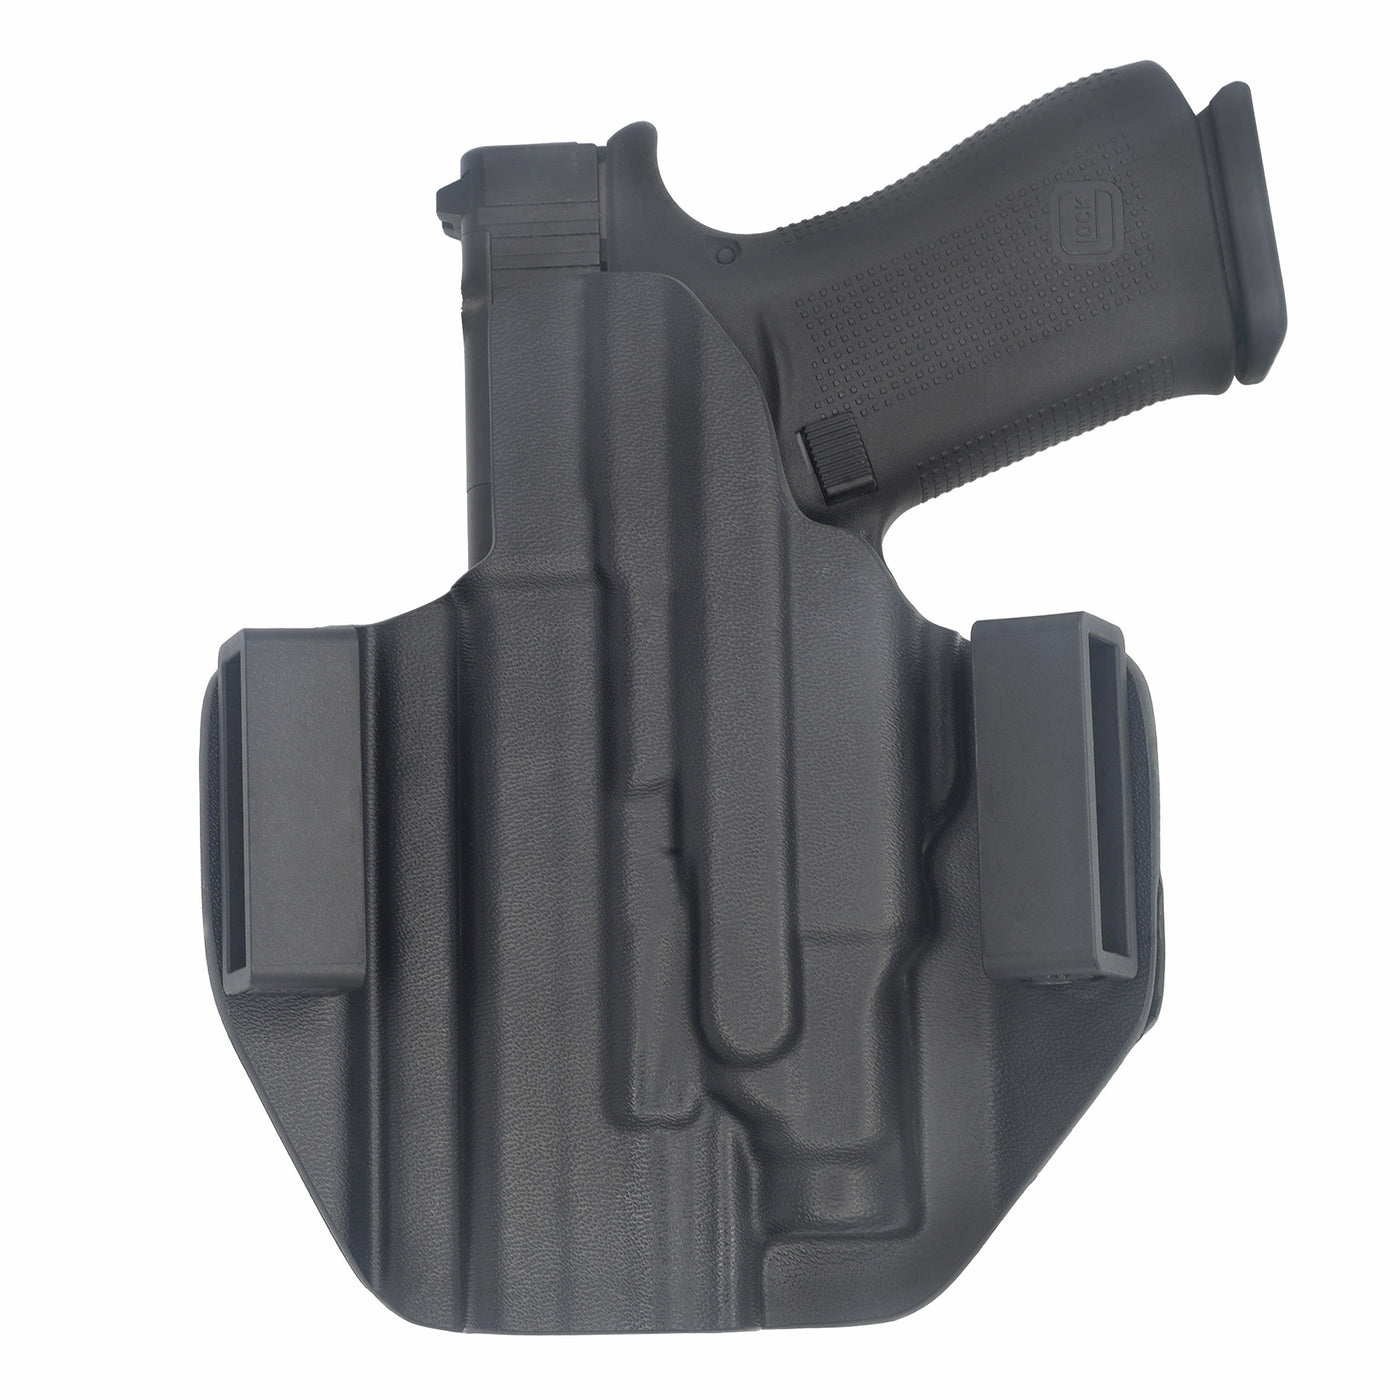 C&G Holsters custom OWB Tactical Shadow Systems CR920 Streamlight TLR7sub holstered back view